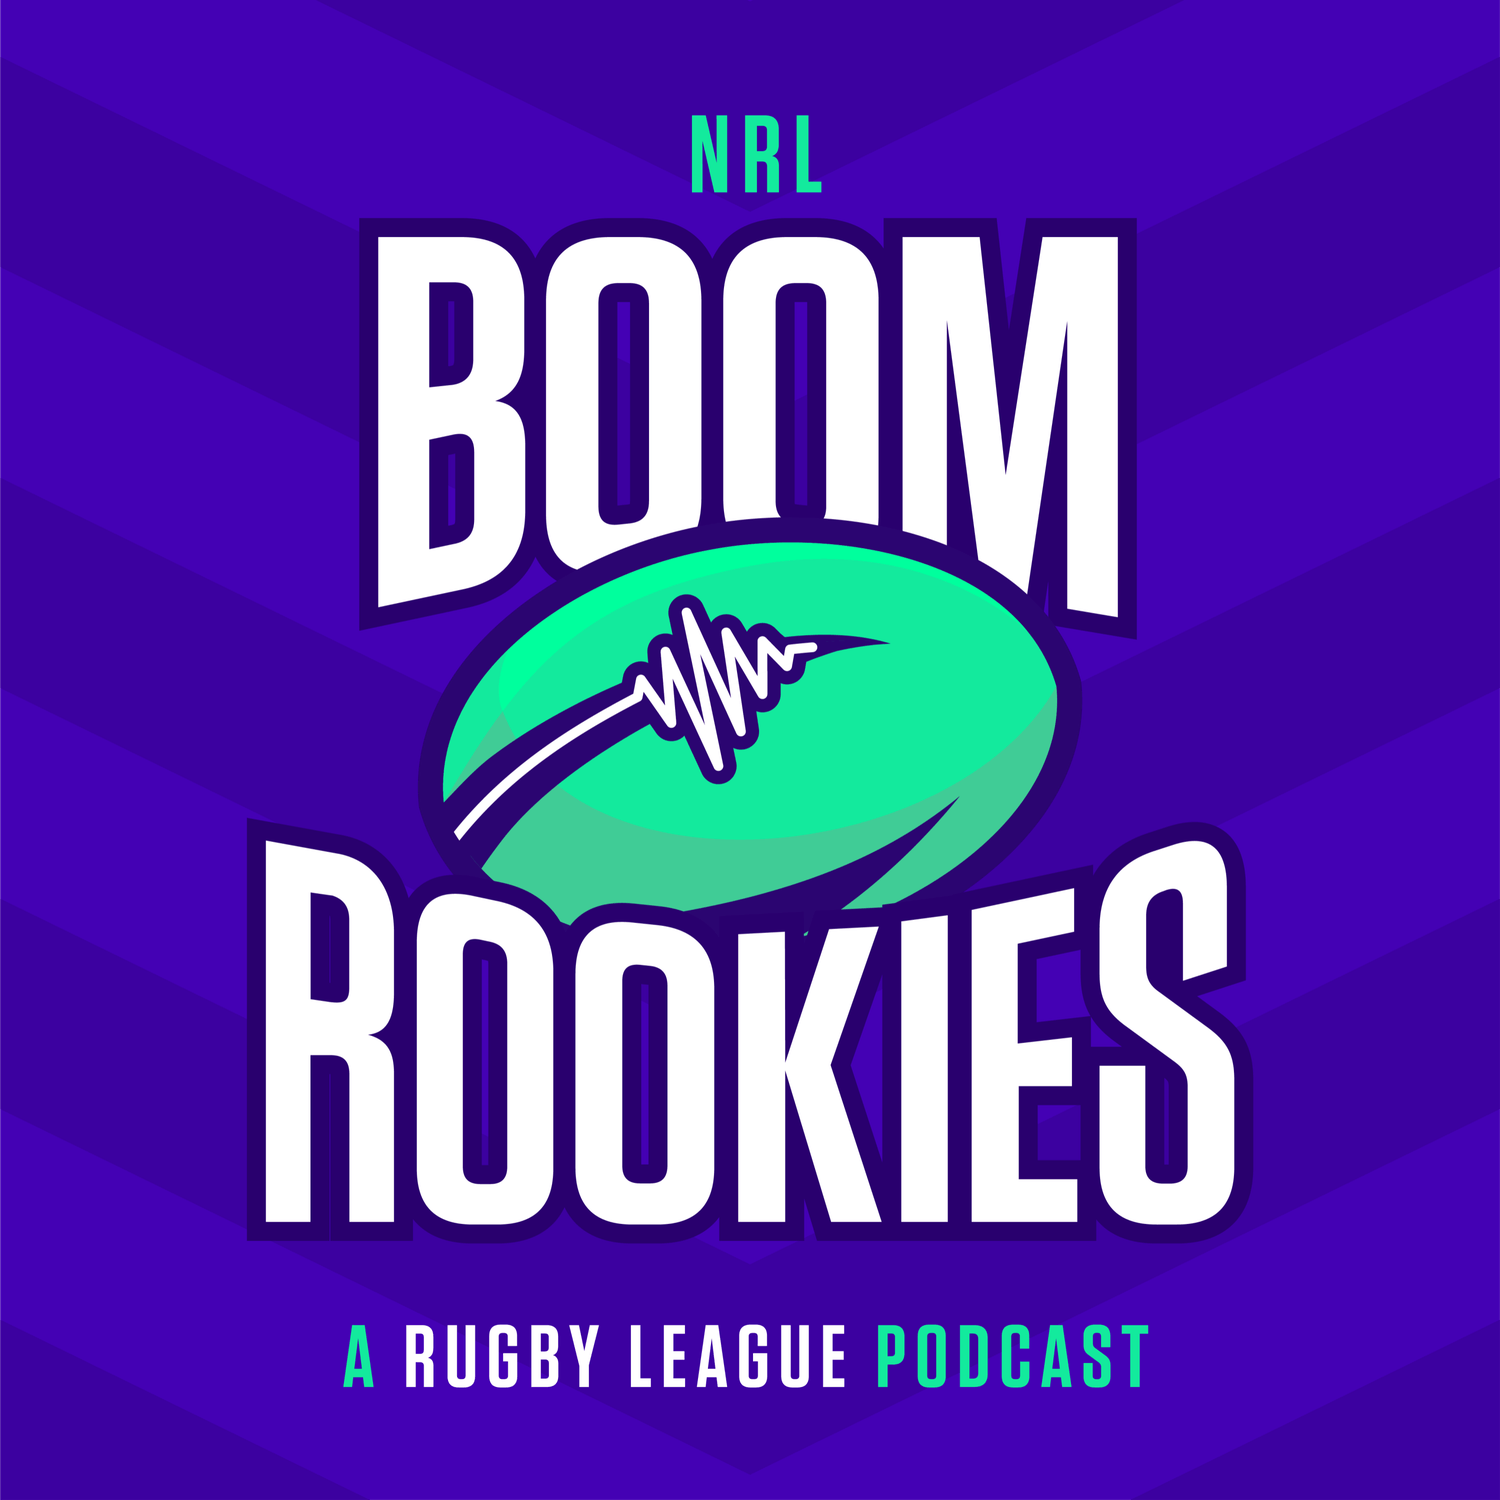 Weekly Wrap & State Of Origin Preview - Intercepted By Locky ft. Ando4285